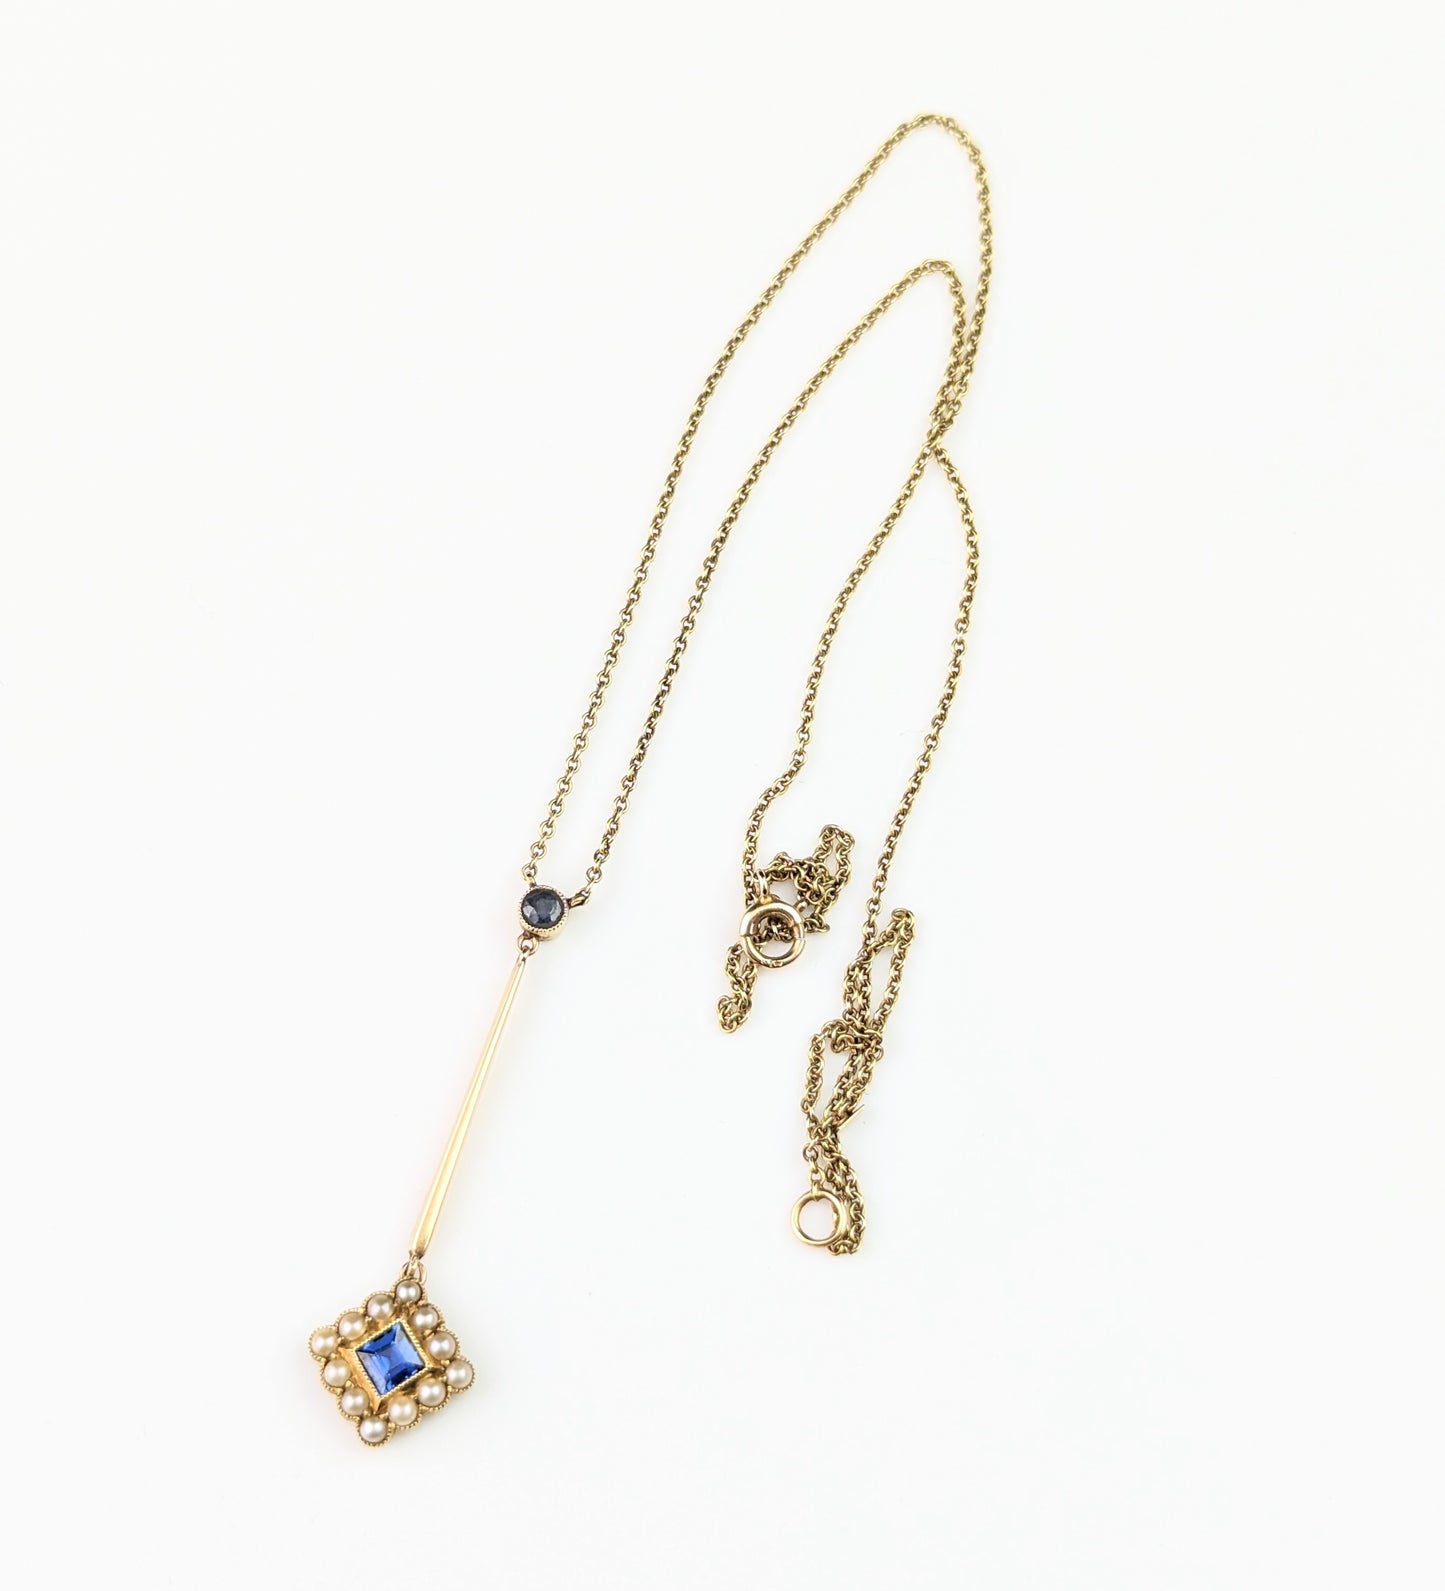 Antique Sapphire and Pearl drop pendant necklace, 15ct yellow gold